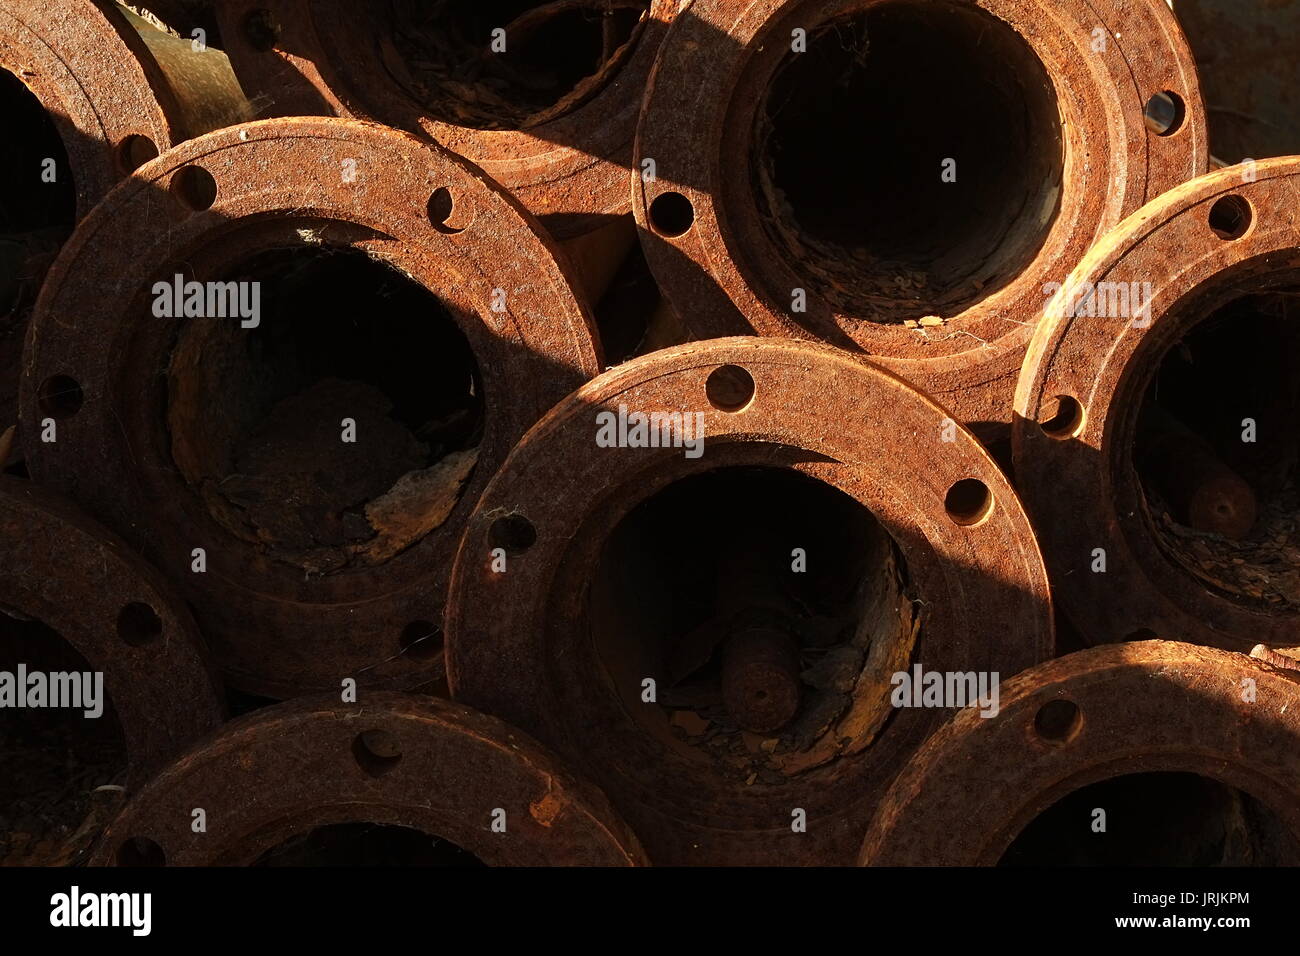 Stack of old and rusty industrial pipes Stock Photo